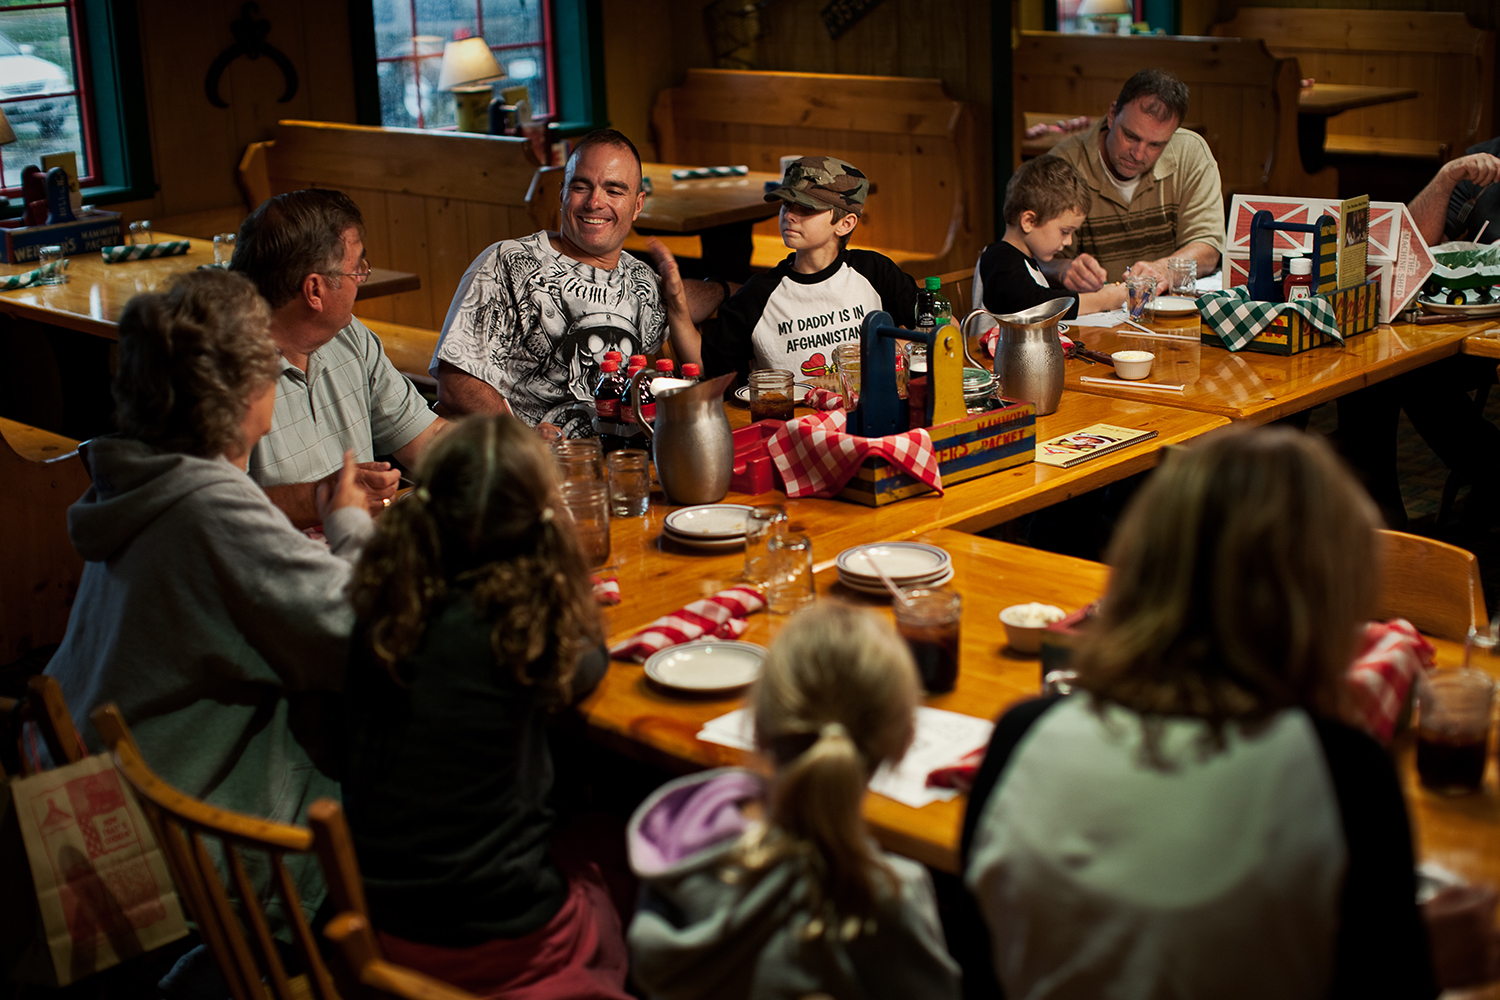  Friends and family of the Eisch family dine together to celebrate Sergeant First Class Brian Eisch's mid-tour leave in Appleton, Wis. 